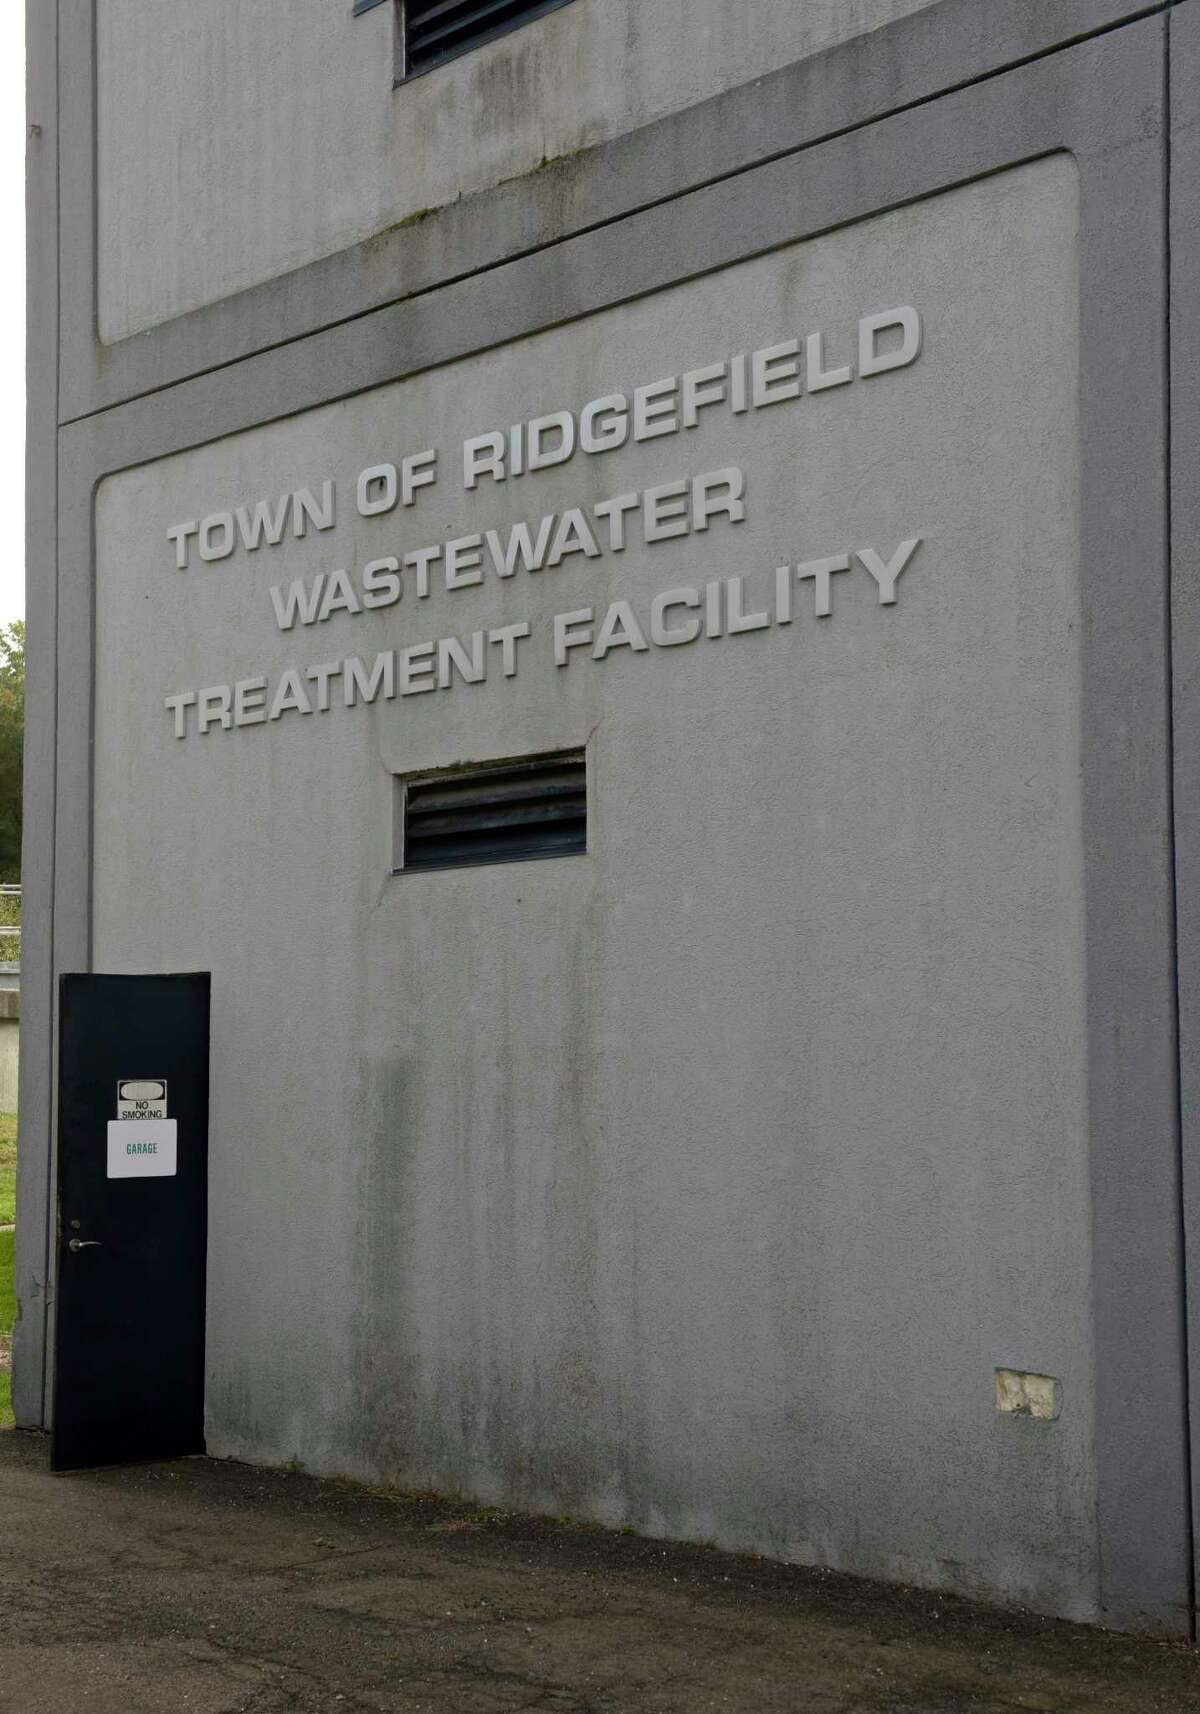 The Ridgefield South Street Wastewater Treatment Facility. Friday, October 5, 2018, in Ridgefield, Conn.